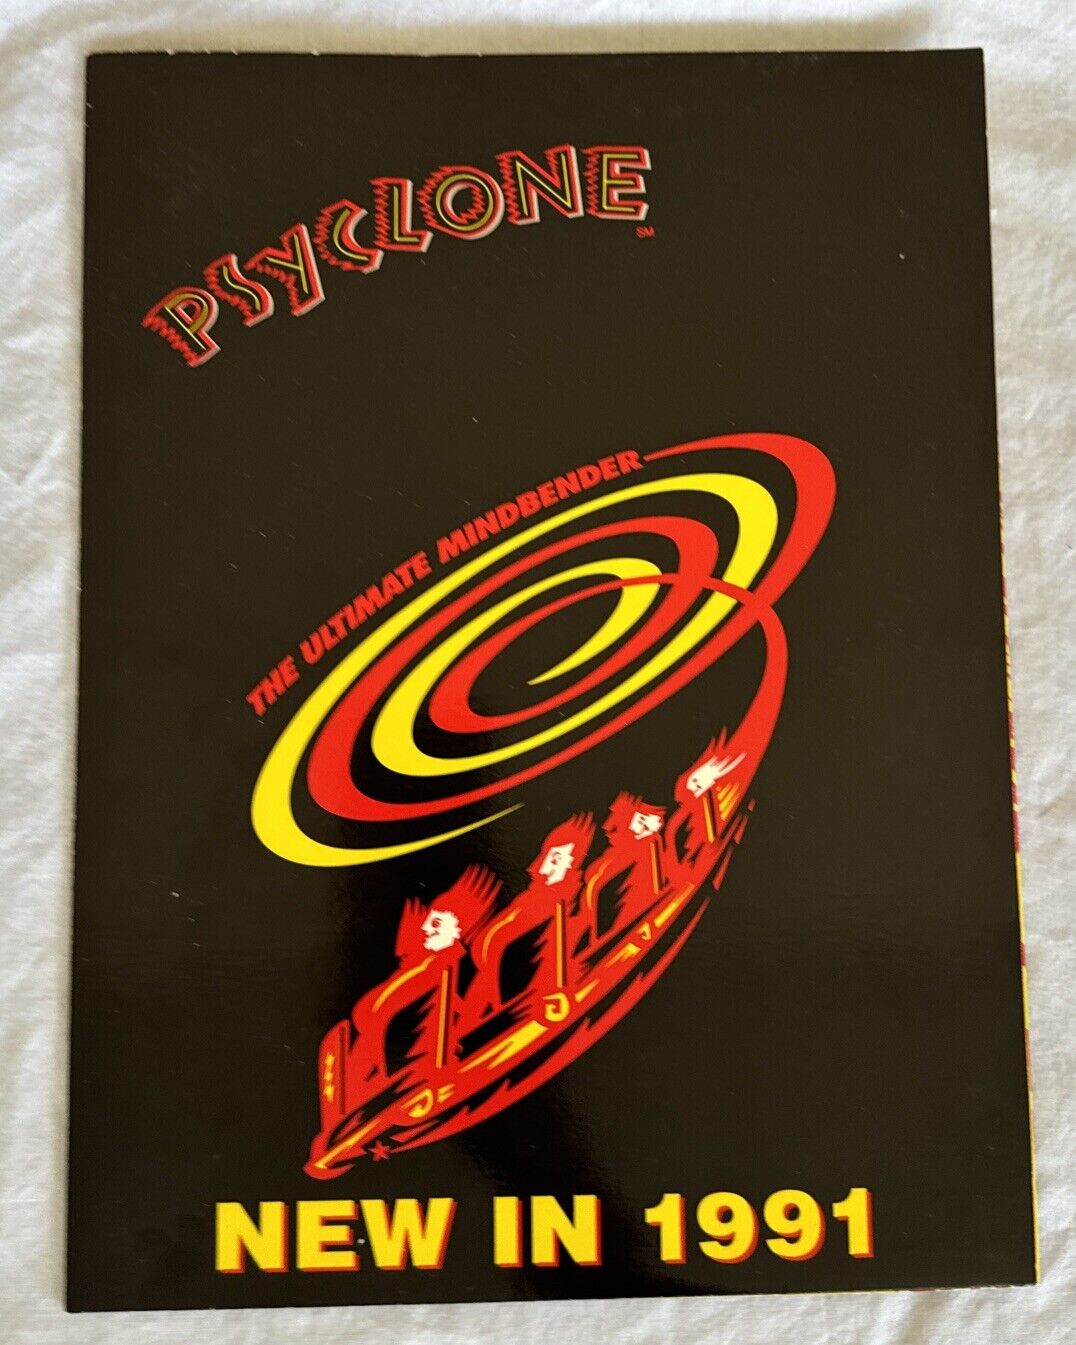 Six Flags Magic Mountain Vintage Press Kit “Psyclone” 1991 Wooden Roller Coaster